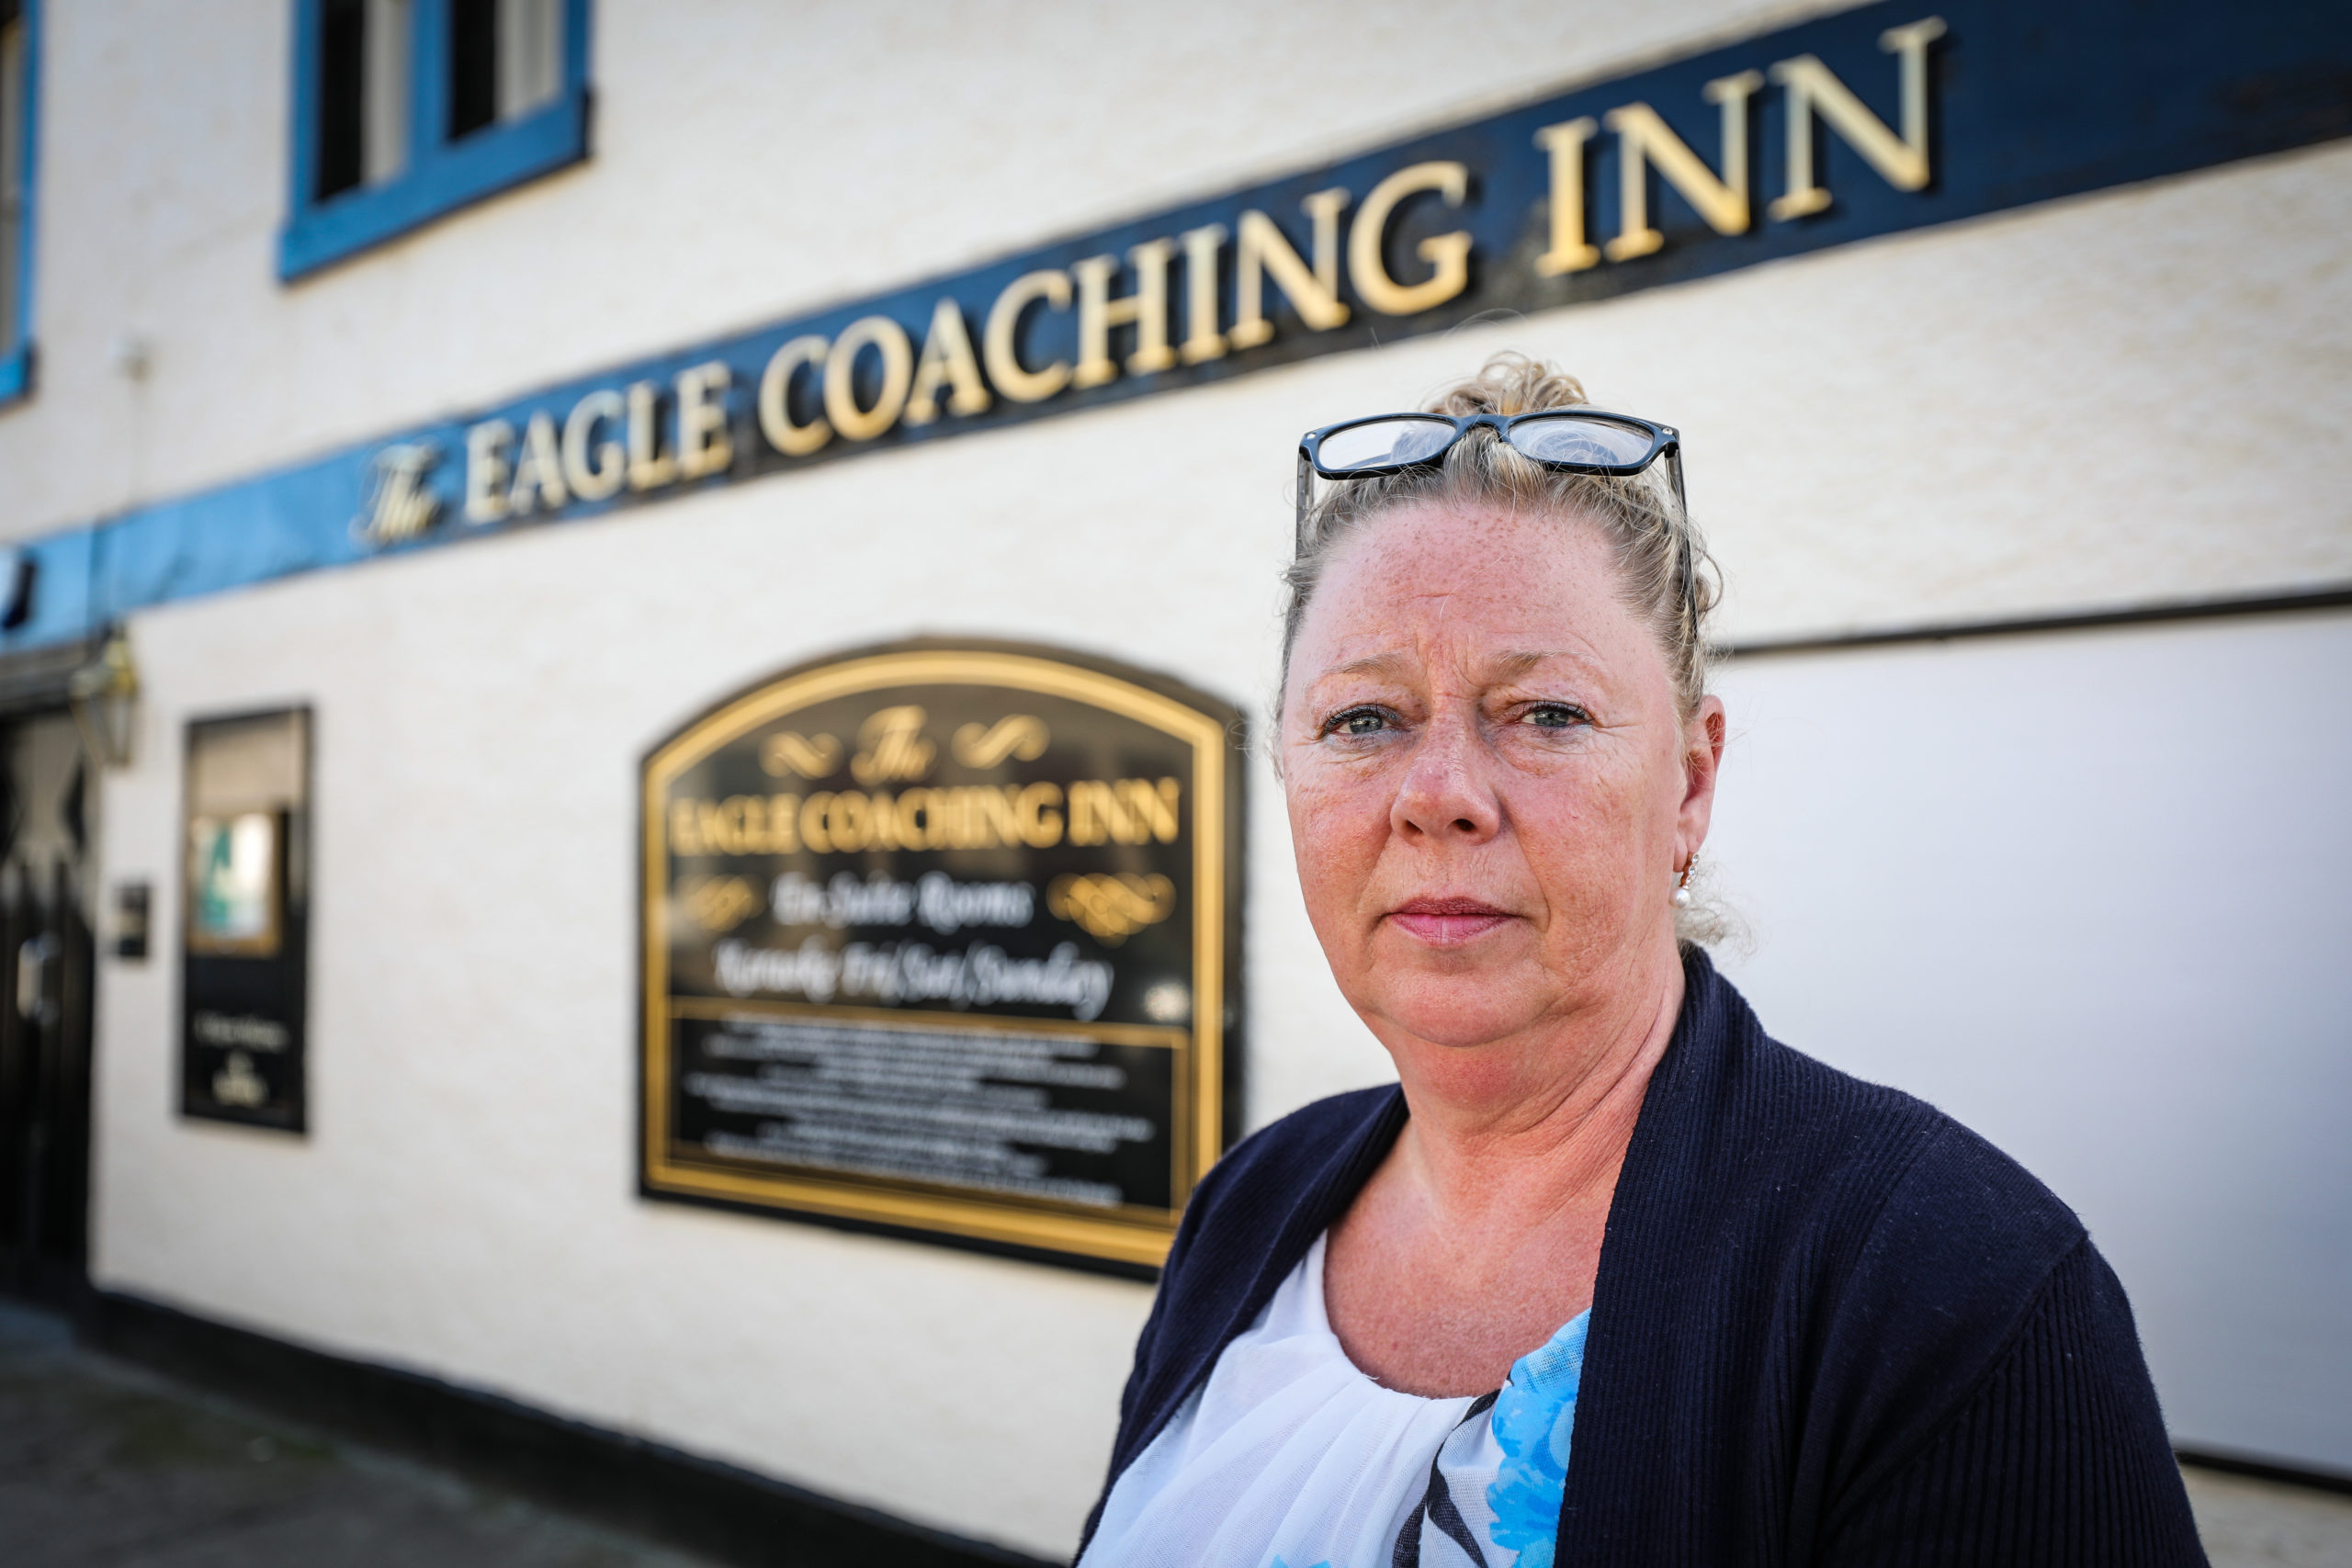 Debbie Findlay, the owner of Eagle Coaching Inn, one of the pubs involved